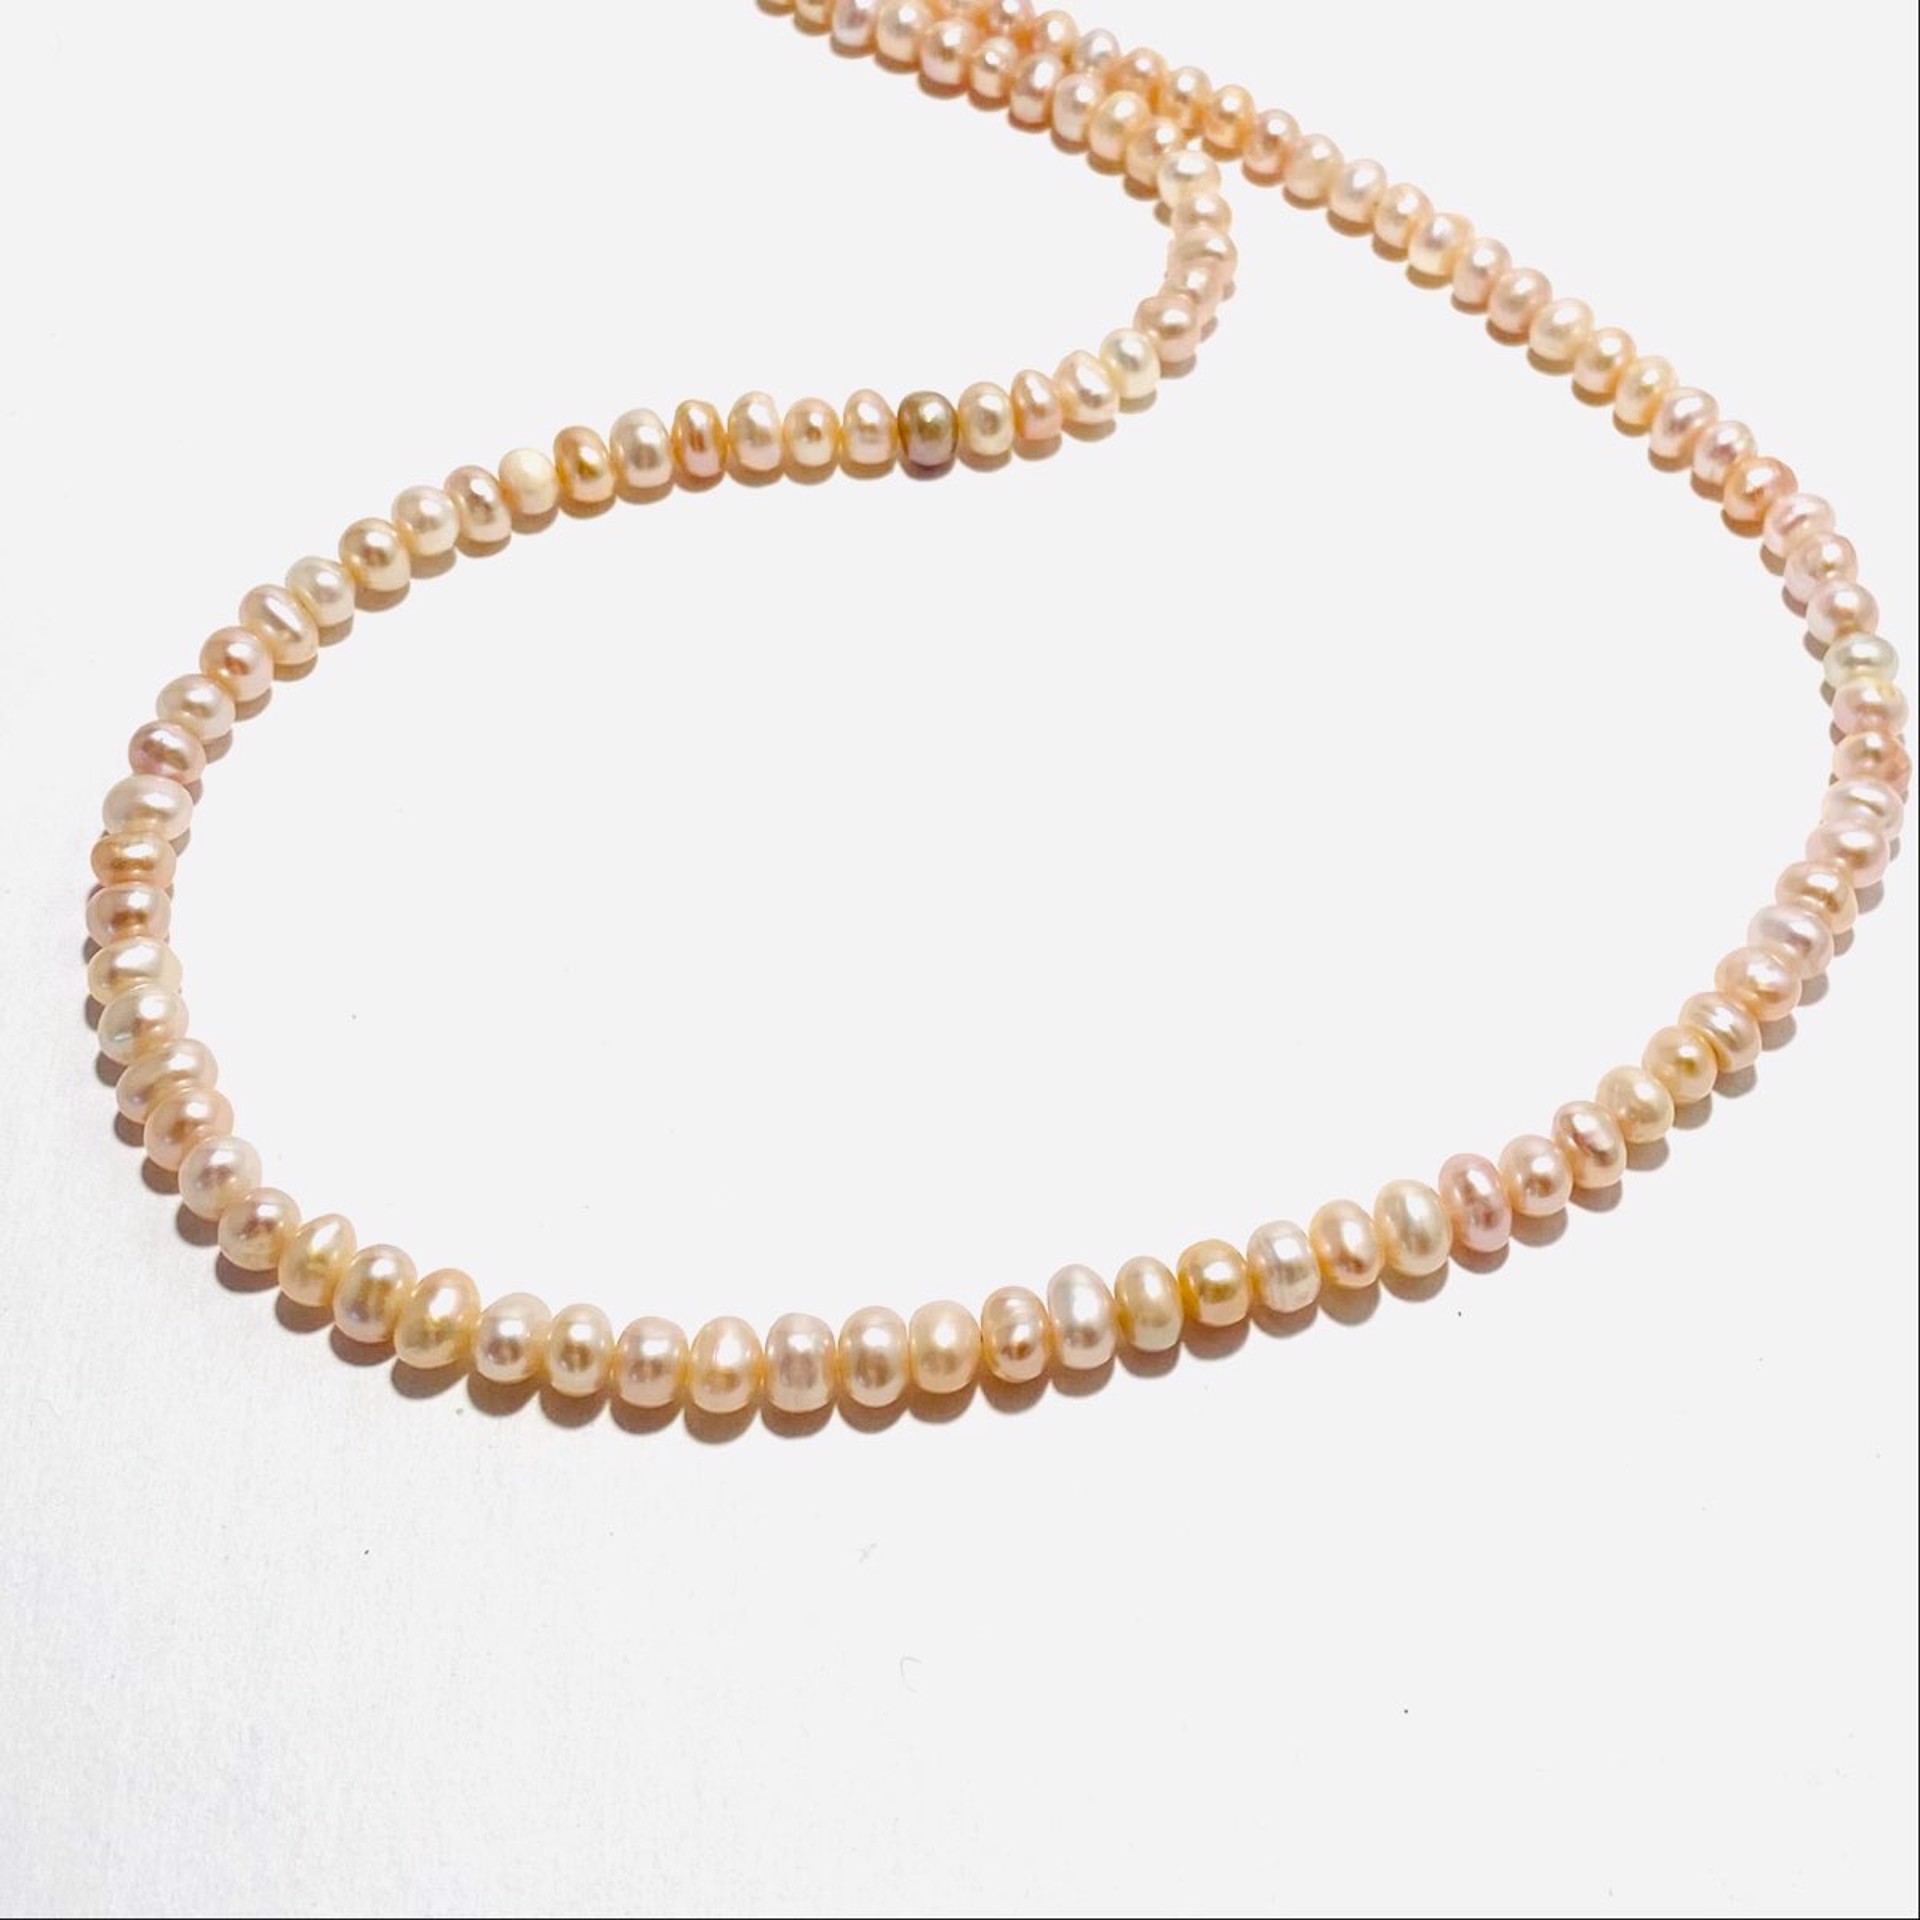 NT22-234  Peach Pearl Strand  Necklace by Nance Trueworthy